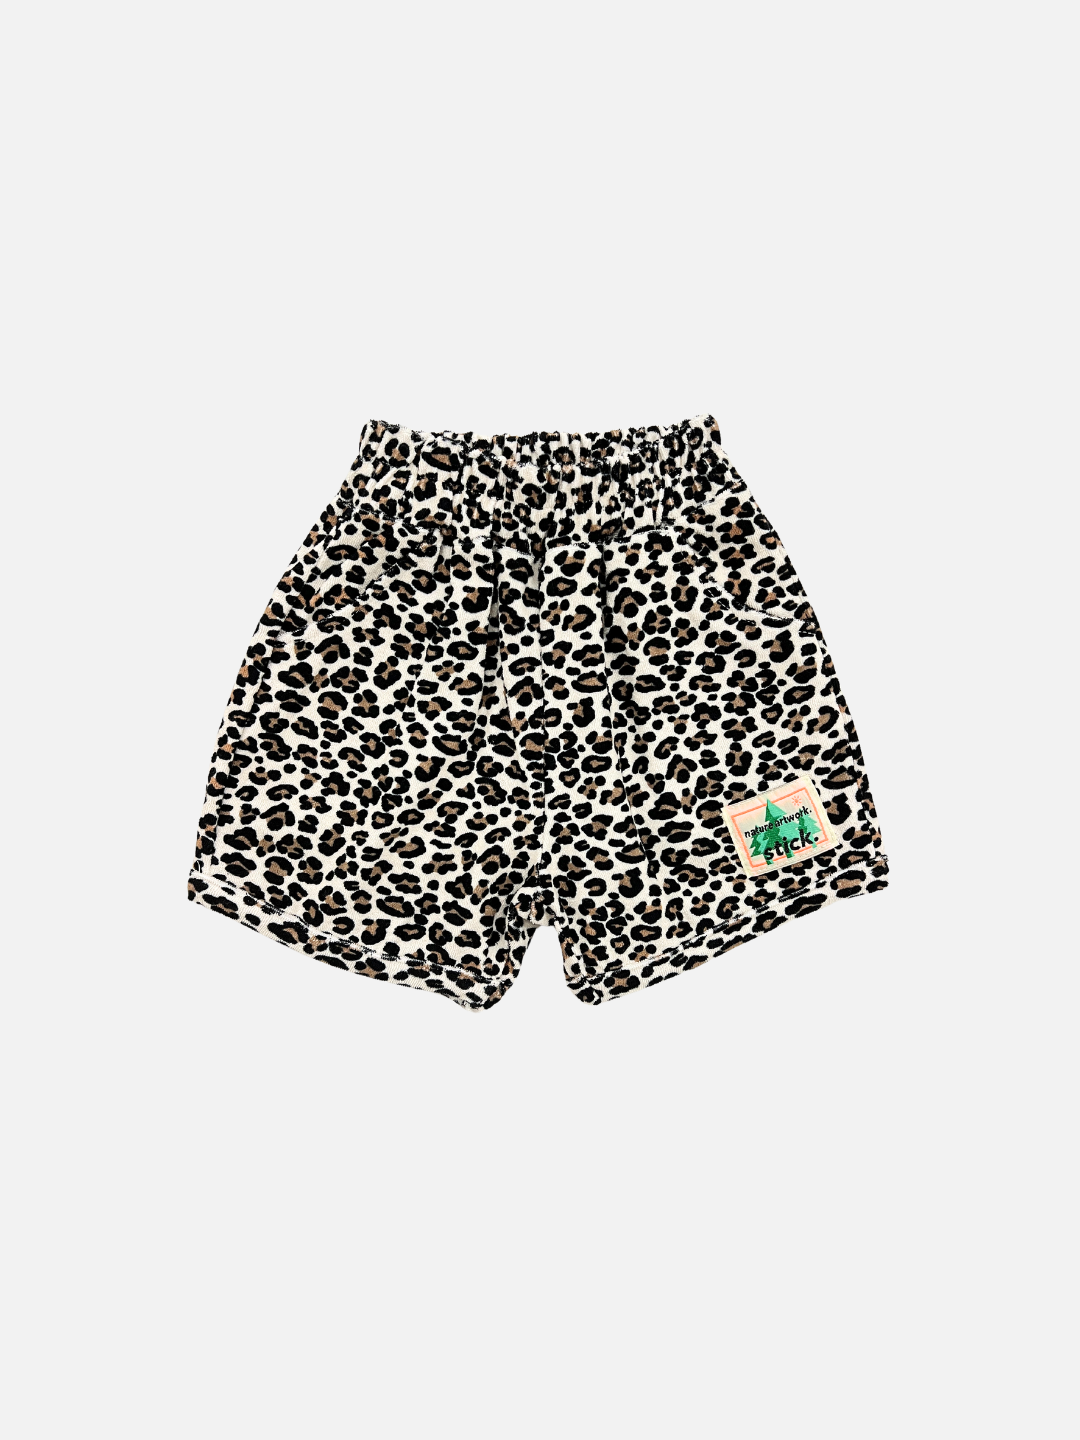 Front view of the kids' Leopard print terrycloth shorts. Stick brand logo on the right leg.